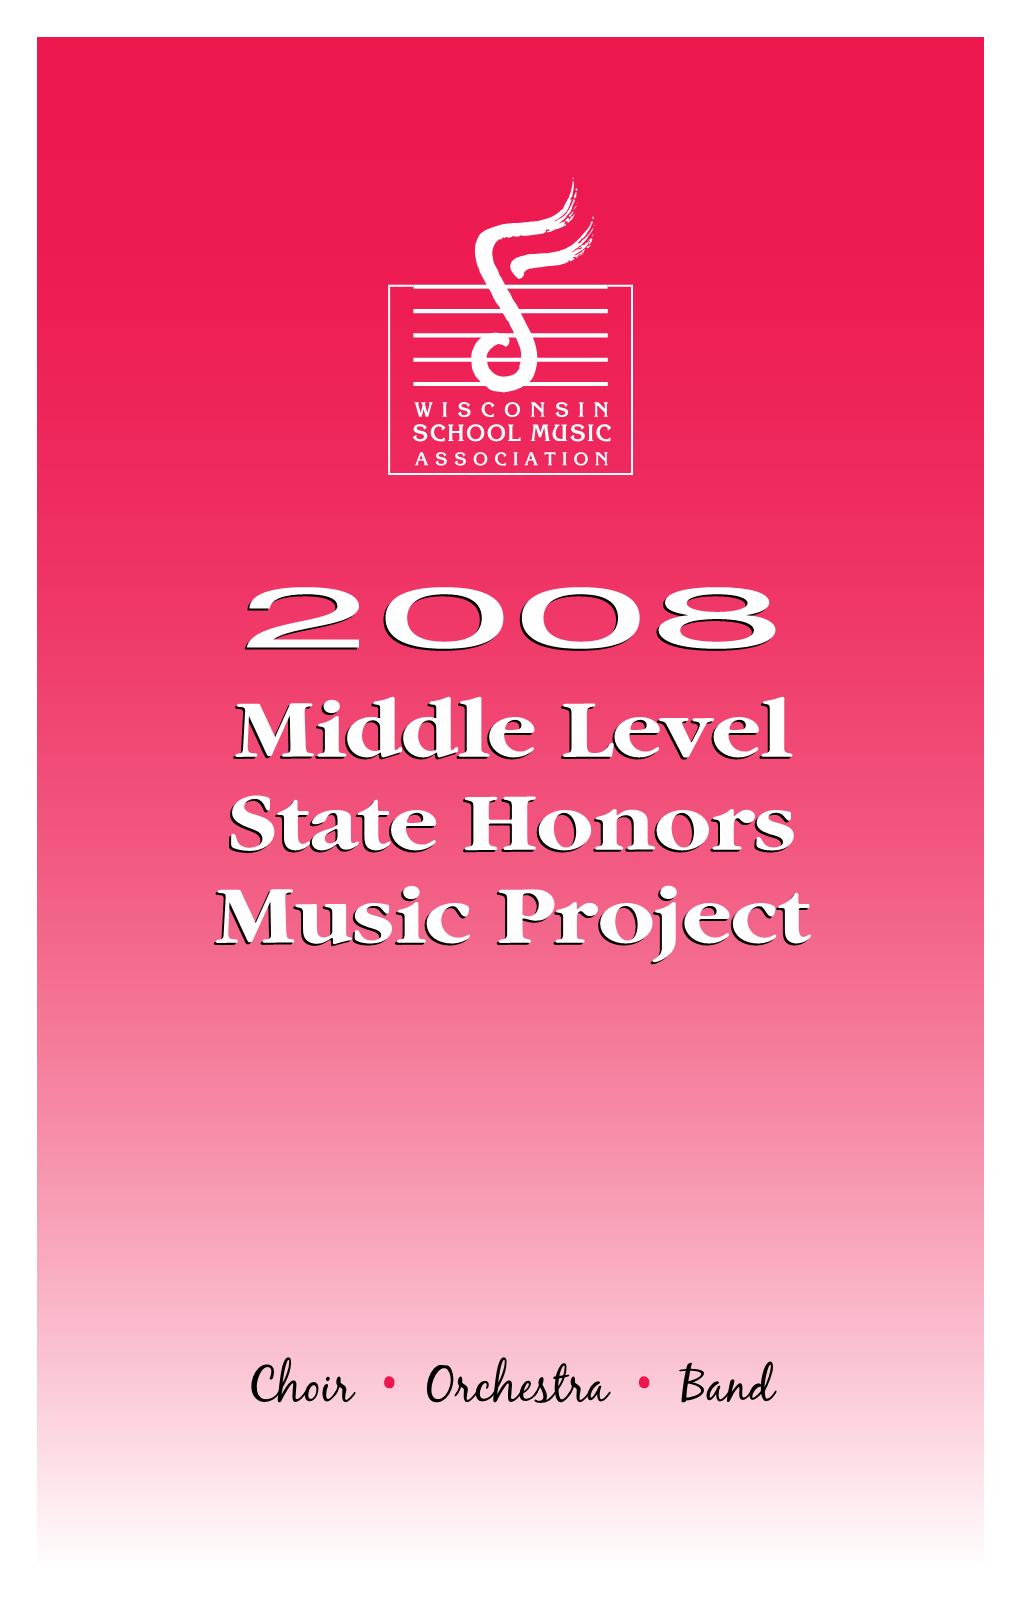 2008 Middle Level State Honors Music Project